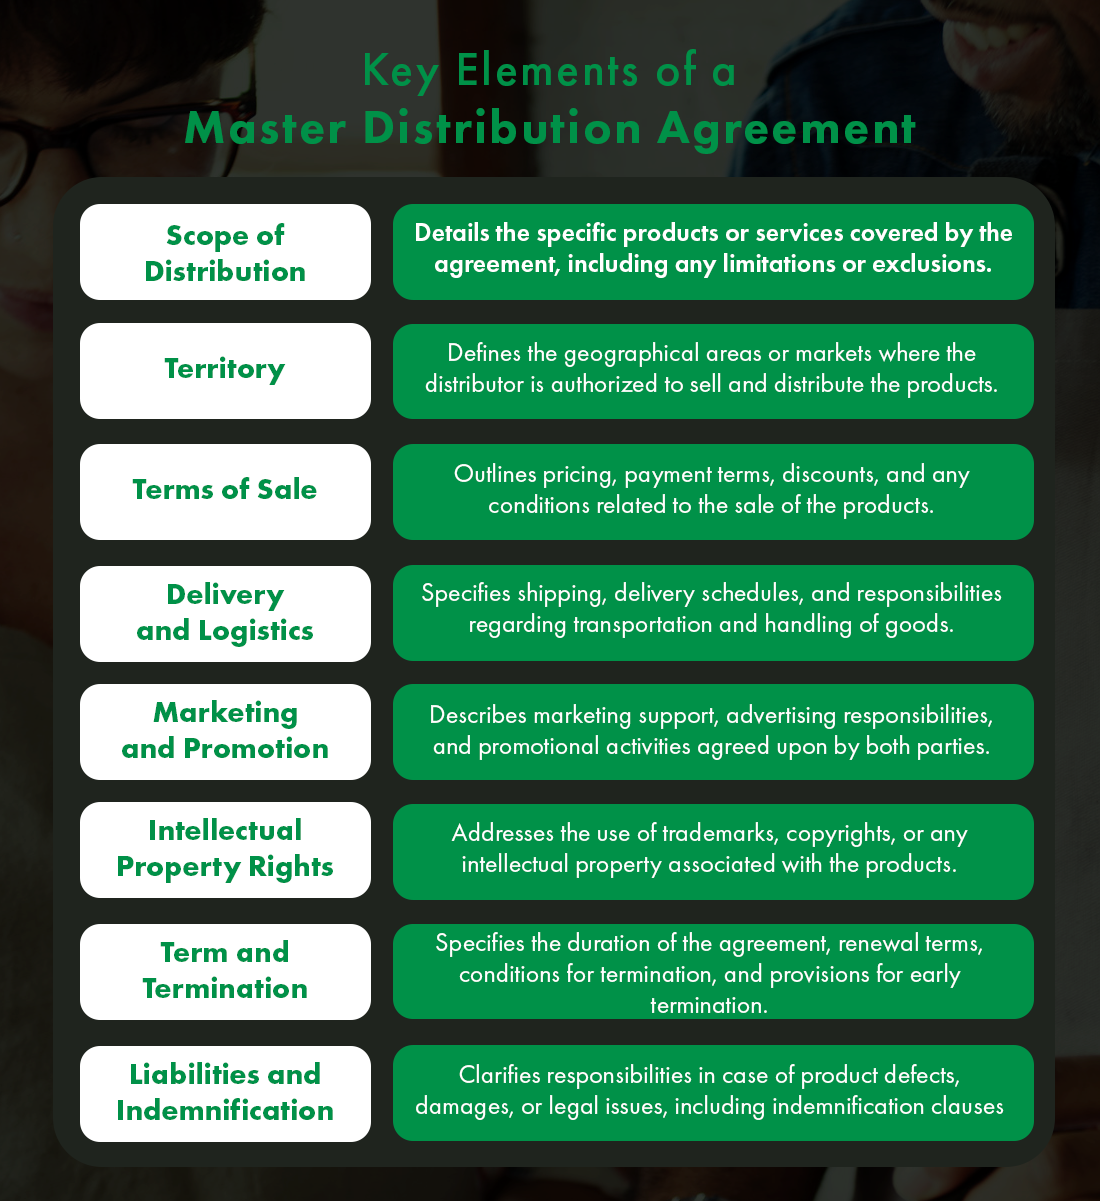 Key elements of a master distribution agreement